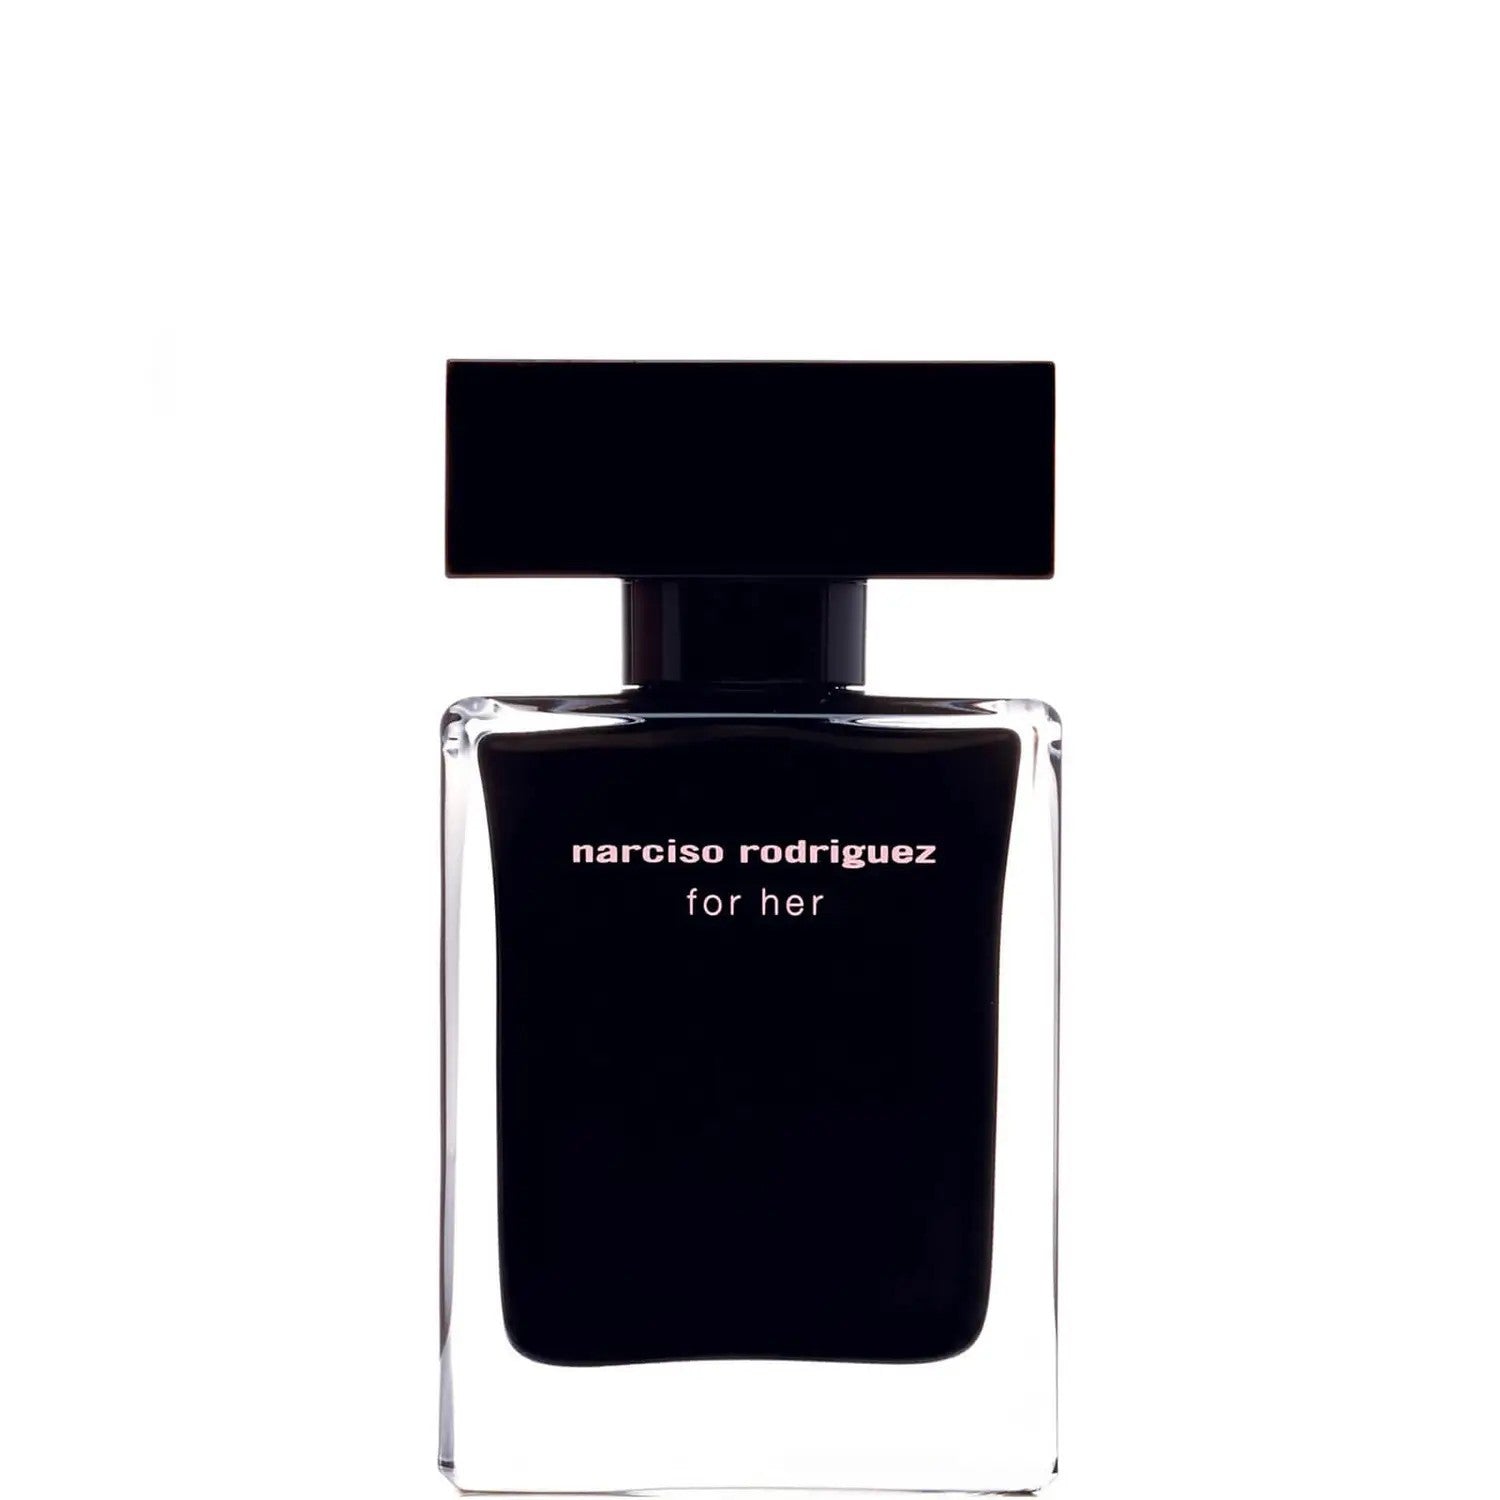 NARCISO RODRIGUEZ FOR HER EDT SPRAY 30ML 